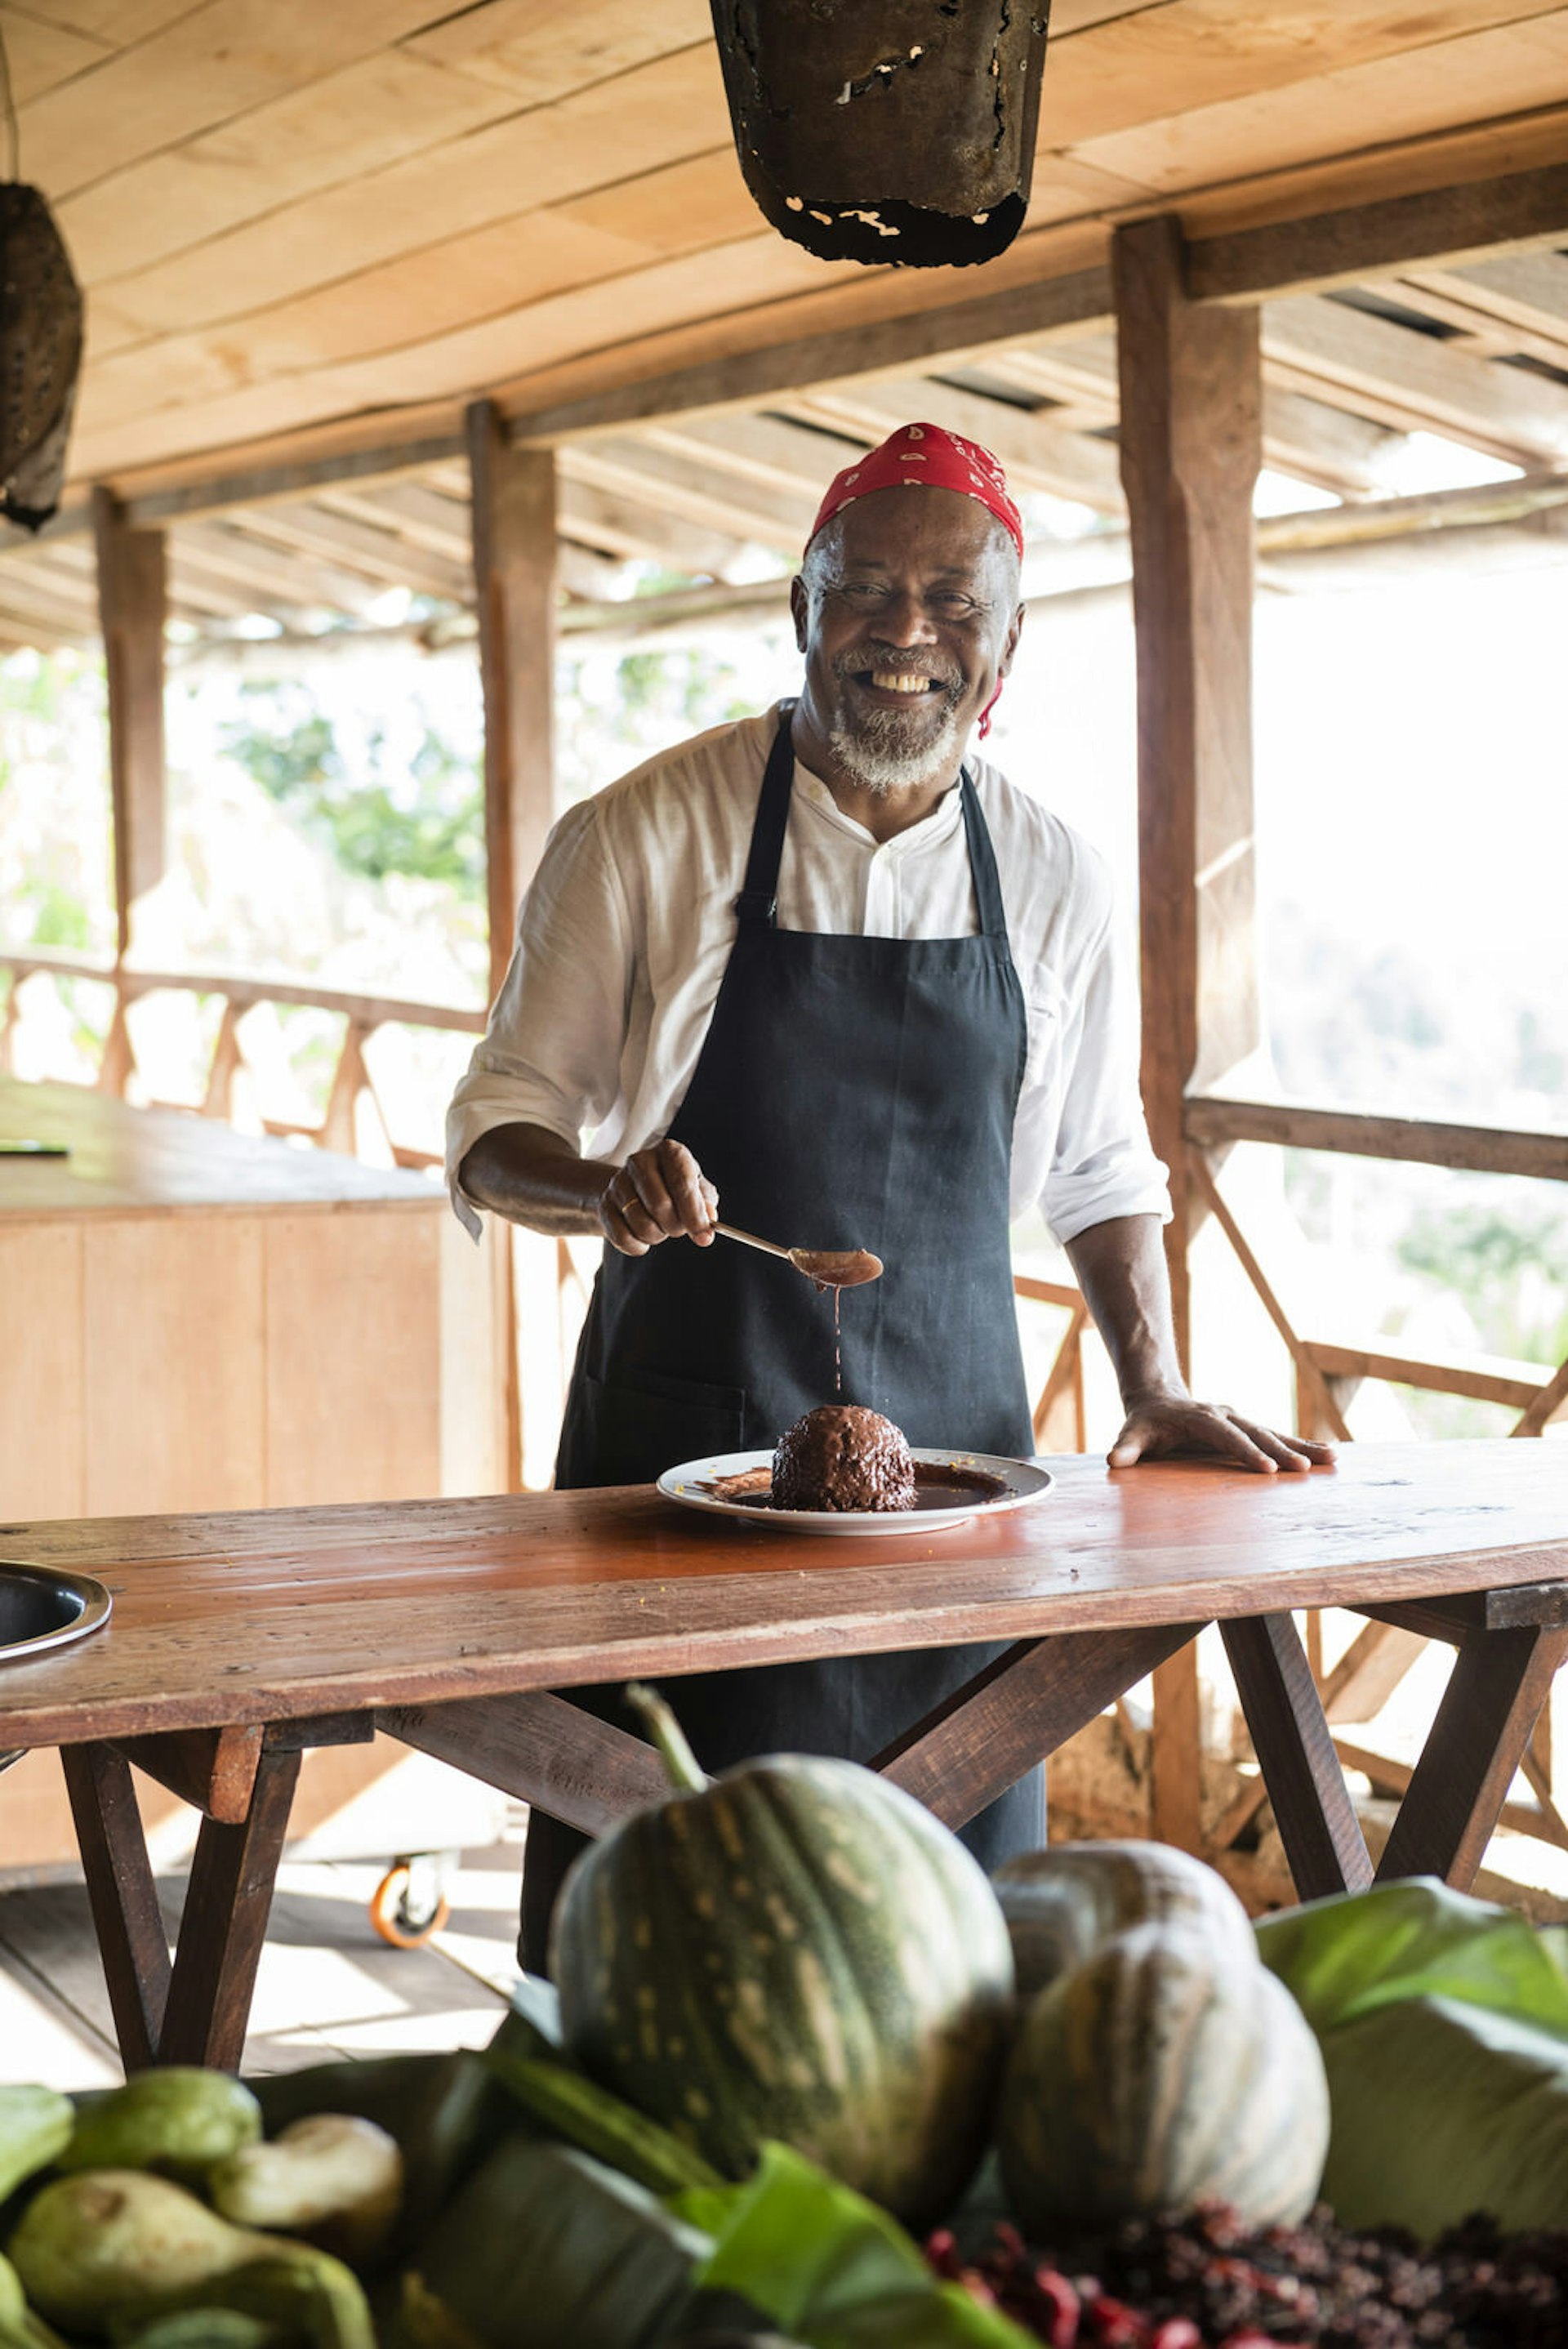 The smiling chef pours sauce over a dish with a spoon. The setting is a wooden building without walls. The plate sits on a wooden table © Justin Foulkes / Lonely Planet